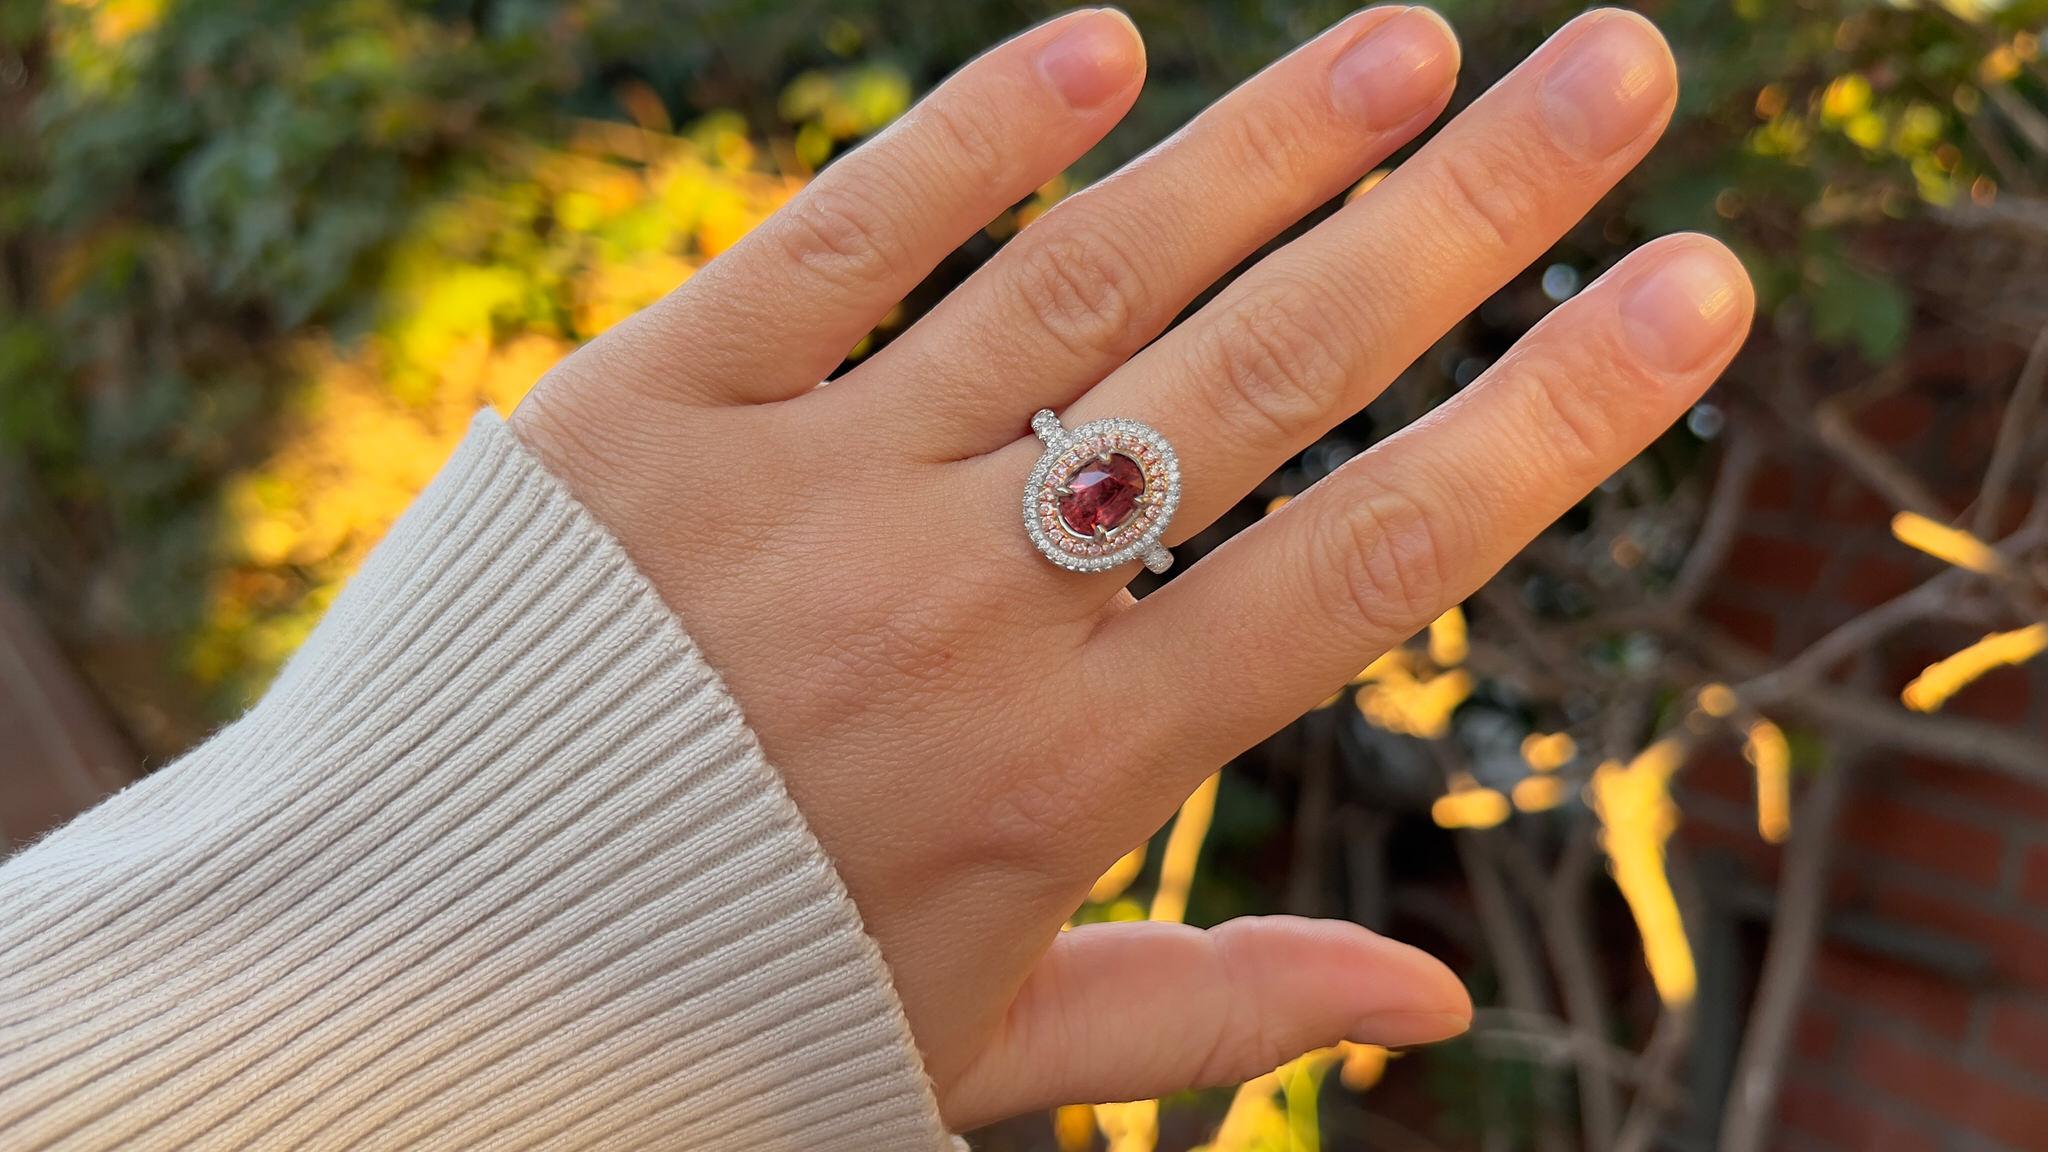 Padparadscha Spinel = 2.10 Carat
(Cut: Oval, Color: Red, Origin: Natural)
Diamond = 0.90 Carats
(Cut: Round, Color: F, Clarity: VS)
Metal = 18K White Gold
Ring Size = 6.25